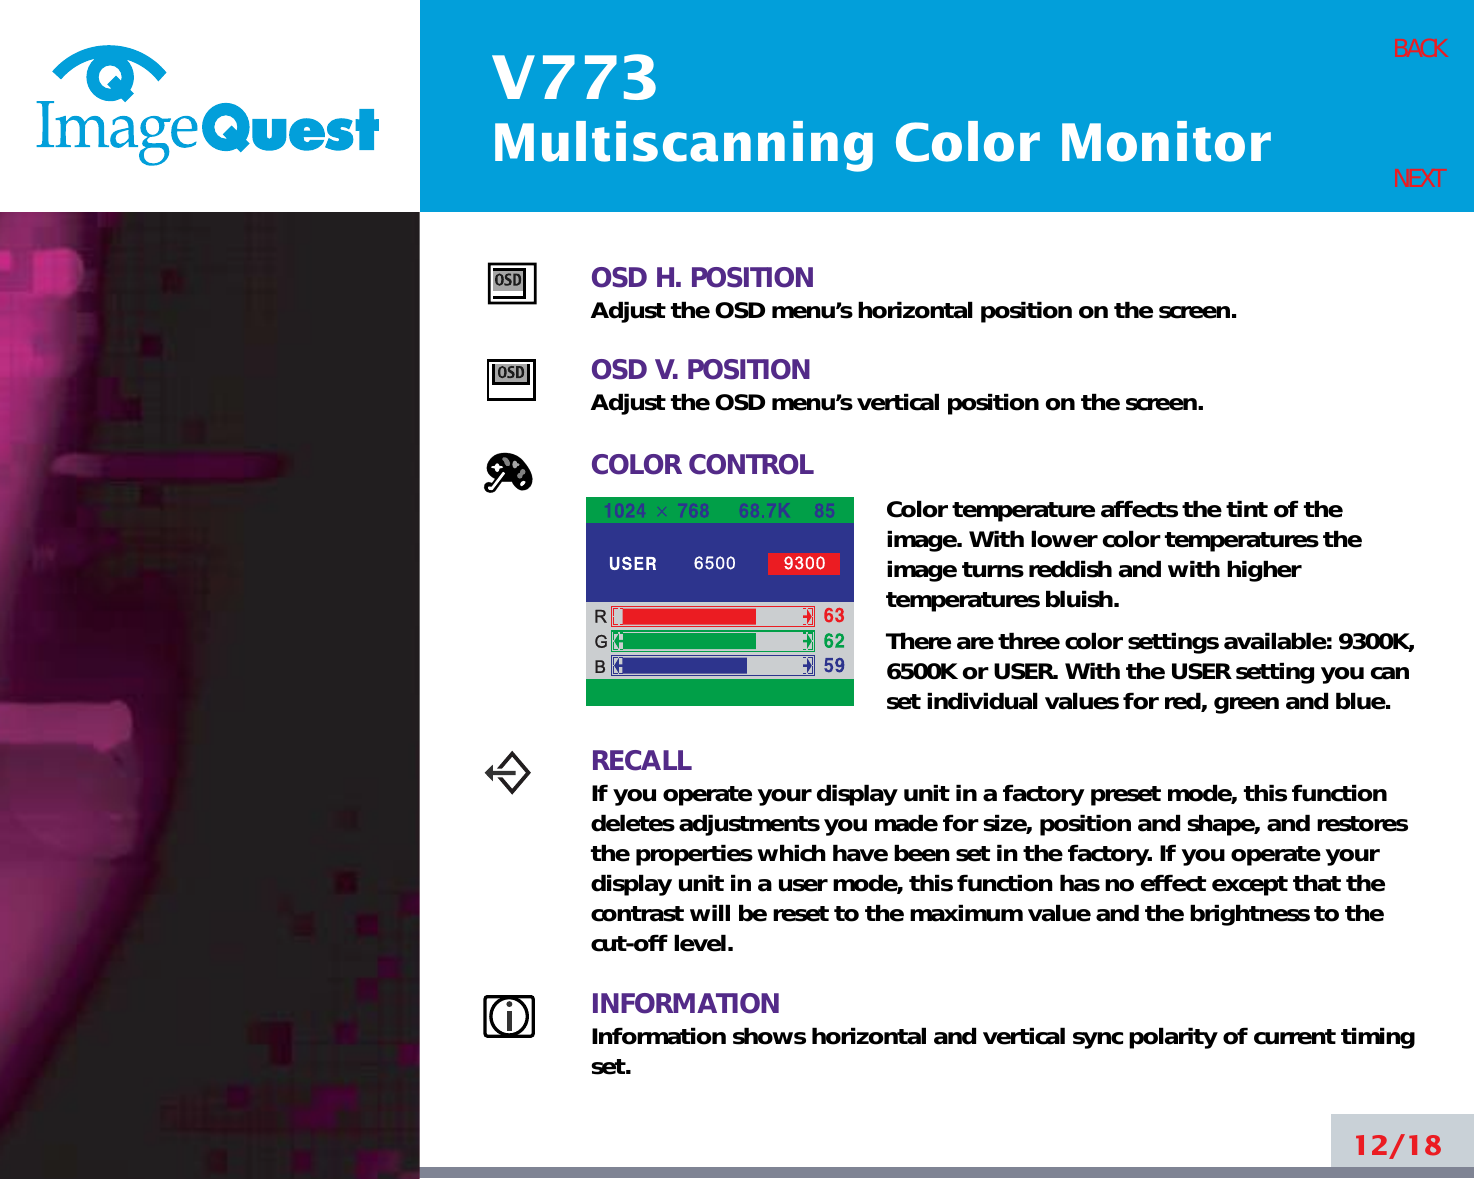 V773Multiscanning Color Monitor12/18BACKNEXTOSD H. POSITIONAdjust the OSD menu’s horizontal position on the screen.OSD V. POSITIONAdjust the OSD menu’s vertical position on the screen.COLOR CONTROLColor temperature affects the tint of theimage. With lower color temperatures theimage turns reddish and with highertemperatures bluish.There are three color settings available: 9300K,6500K or USER. With the USER setting you canset individual values for red, green and blue.RECALLIf you operate your display unit in a factory preset mode, this functiondeletes adjustments you made for size, position and shape, and restoresthe properties which have been set in the factory. If you operate yourdisplay unit in a user mode, this function has no effect except that thecontrast will be reset to the maximum value and the brightness to thecut-off level.INFORMATIONInformation shows horizontal and vertical sync polarity of current timingset.